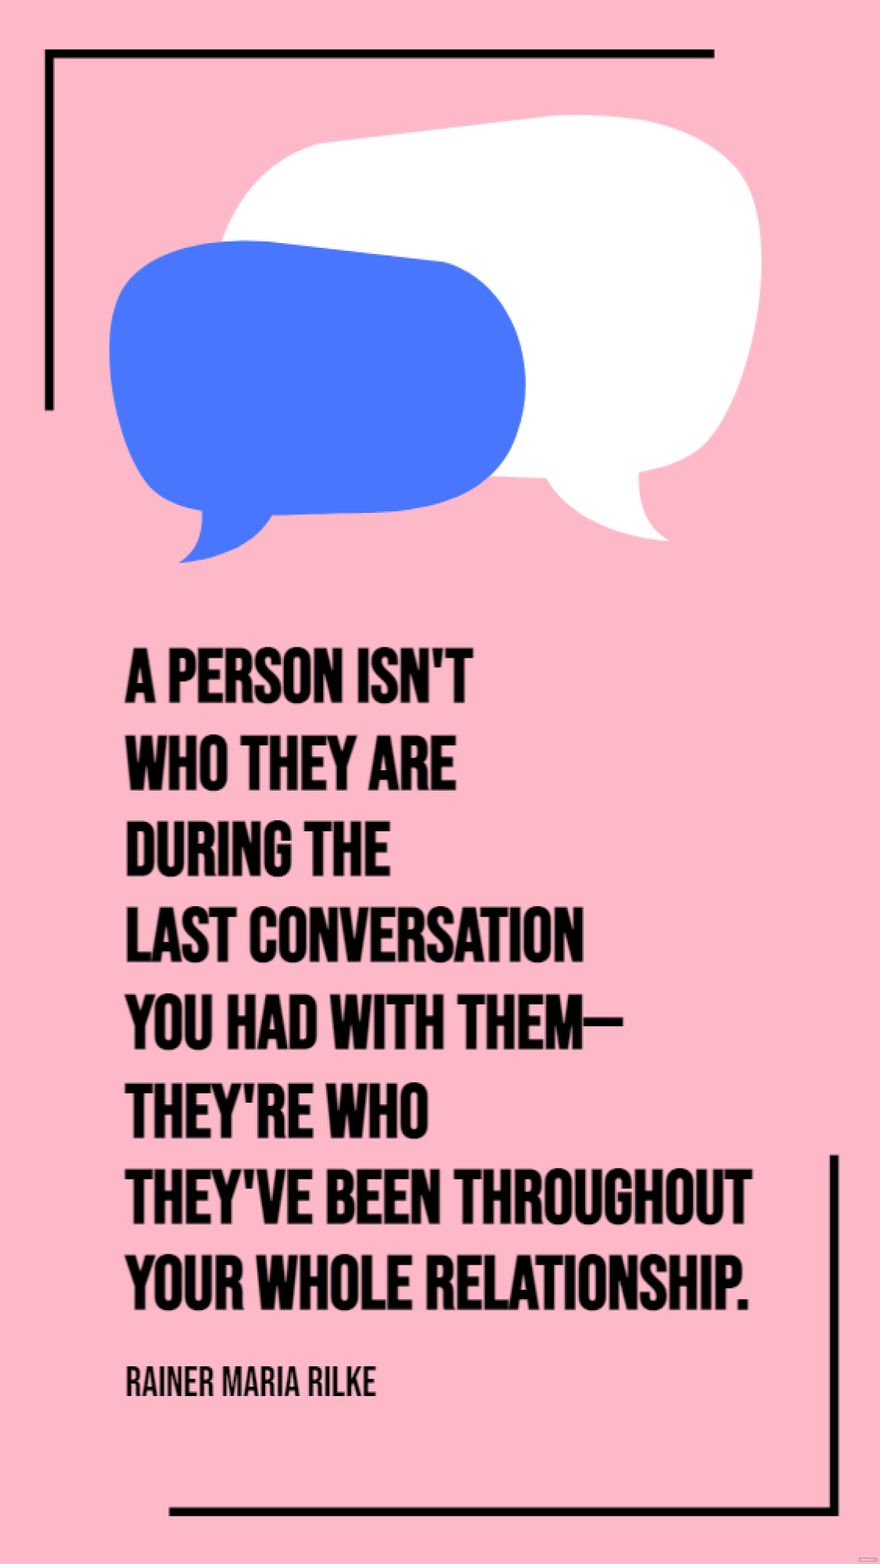 Relationship Quotes - Images | Template.net